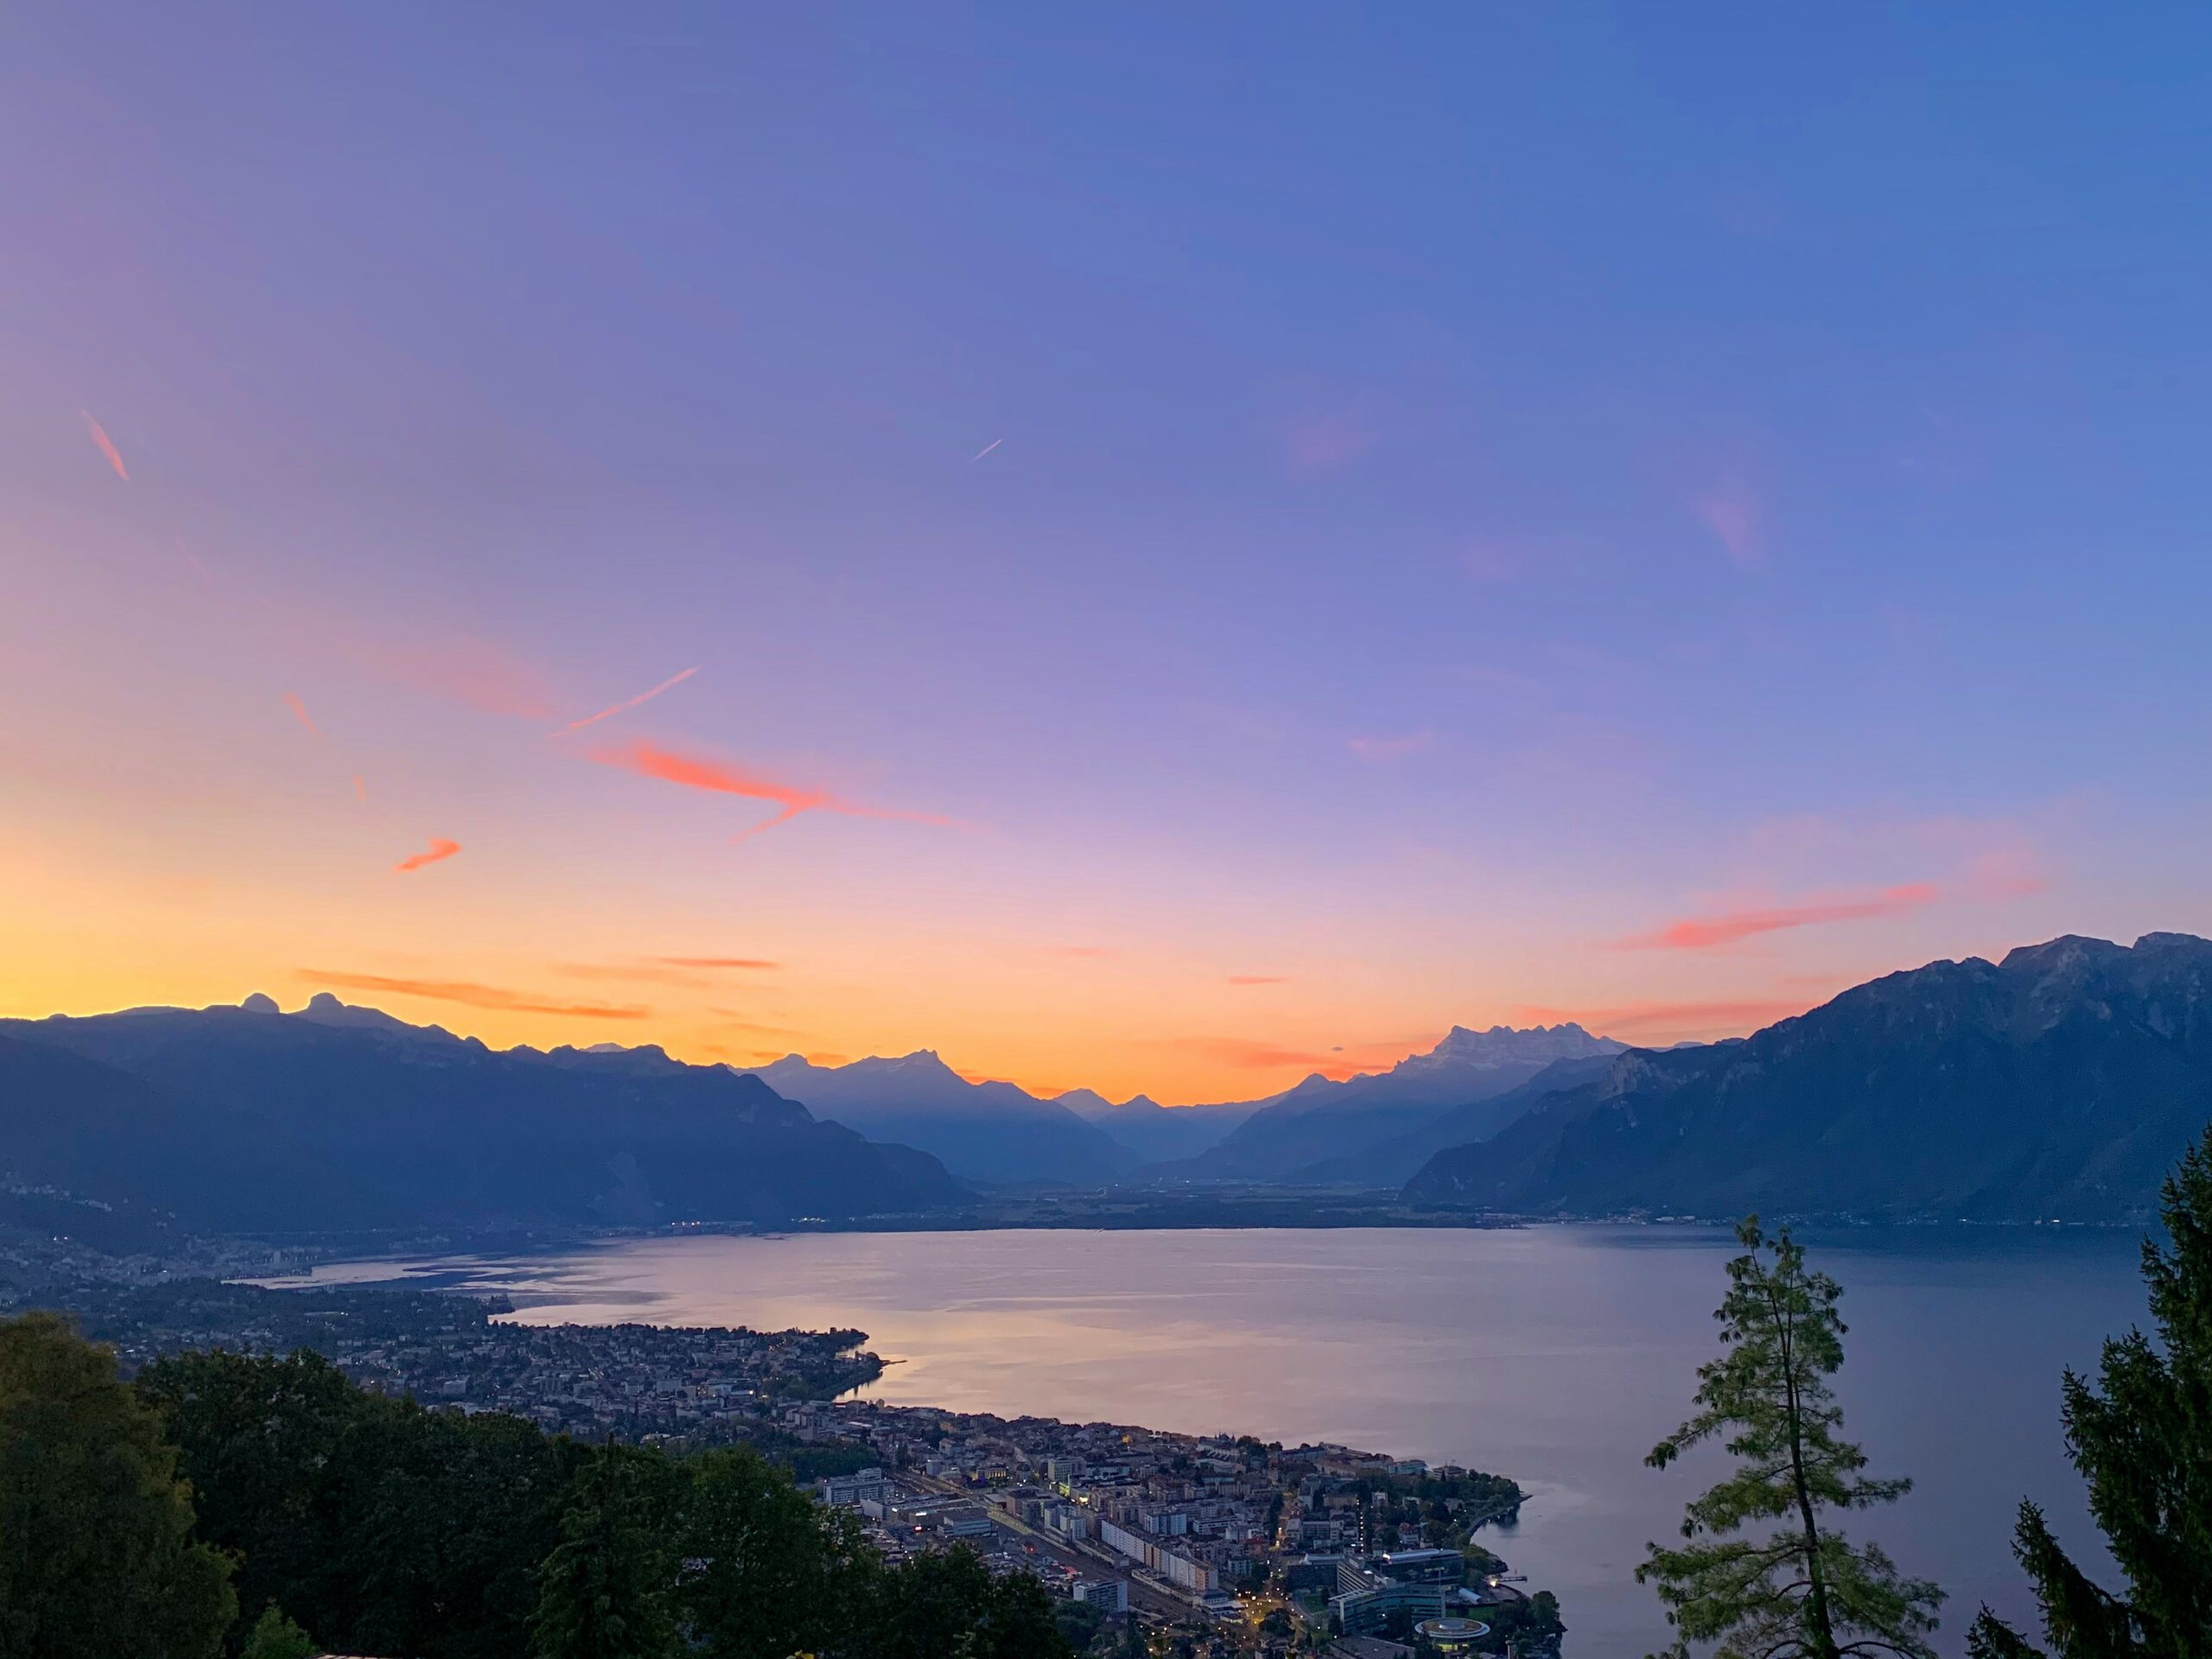 Aireal view of Lake Geneva and the alps during sunset